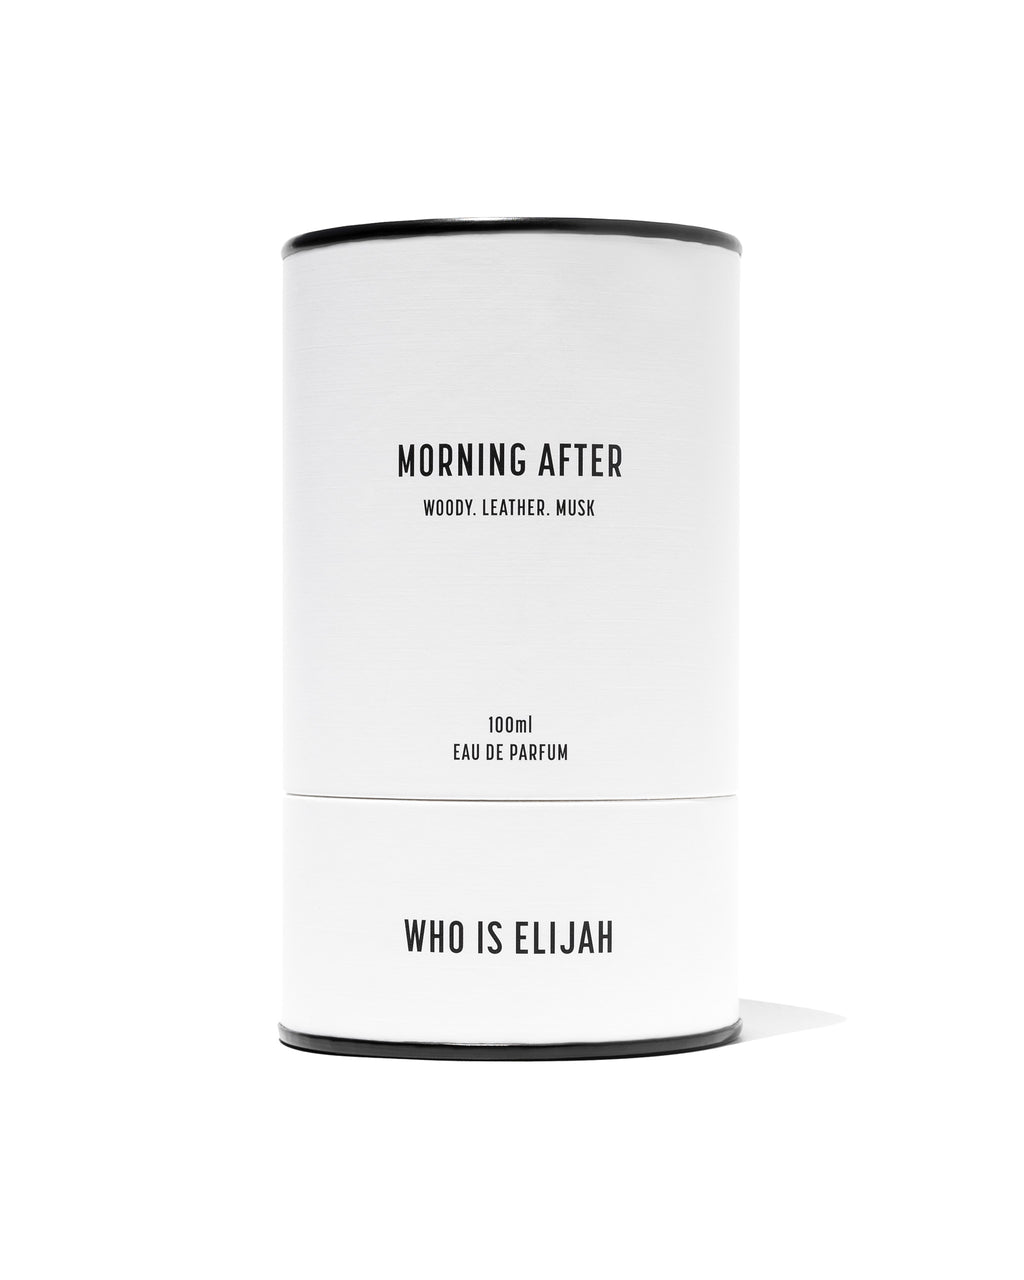 Who Is Elijah - MORNING AFTER - Woody, Leather, Musk